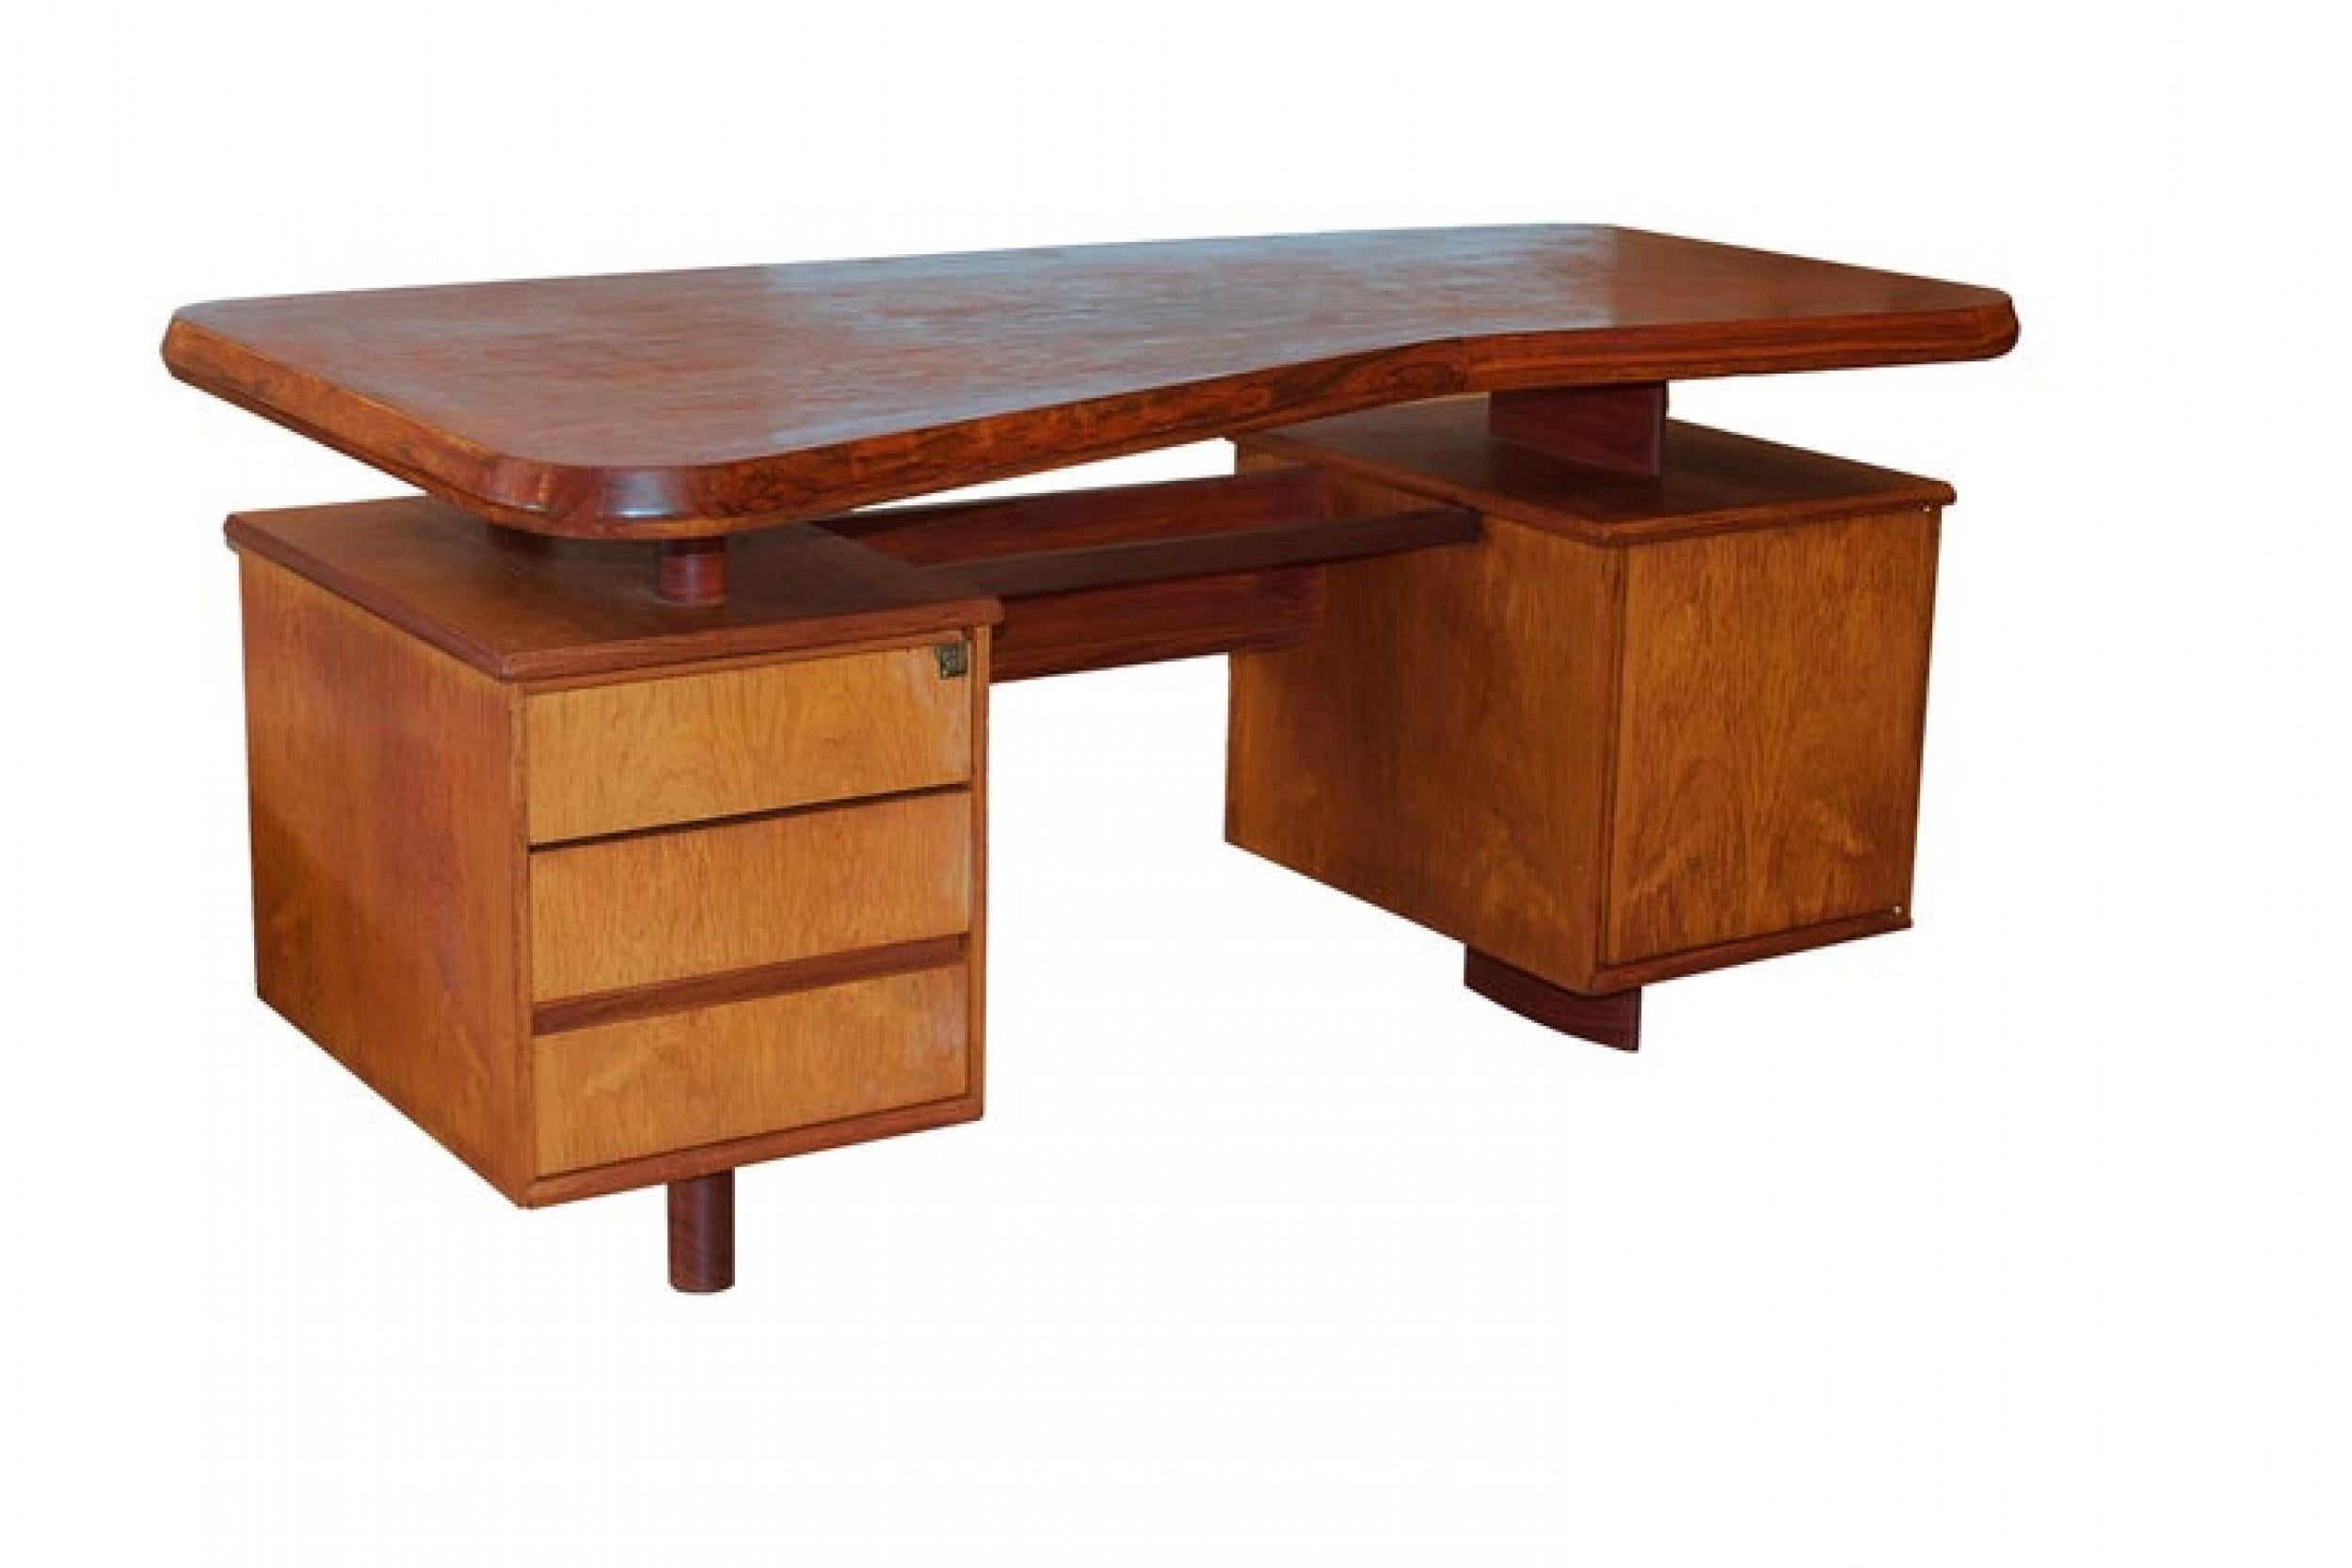 Unique French Modern Solid Rosewood Desk, Pierre Chapo, 1950s For Sale 2